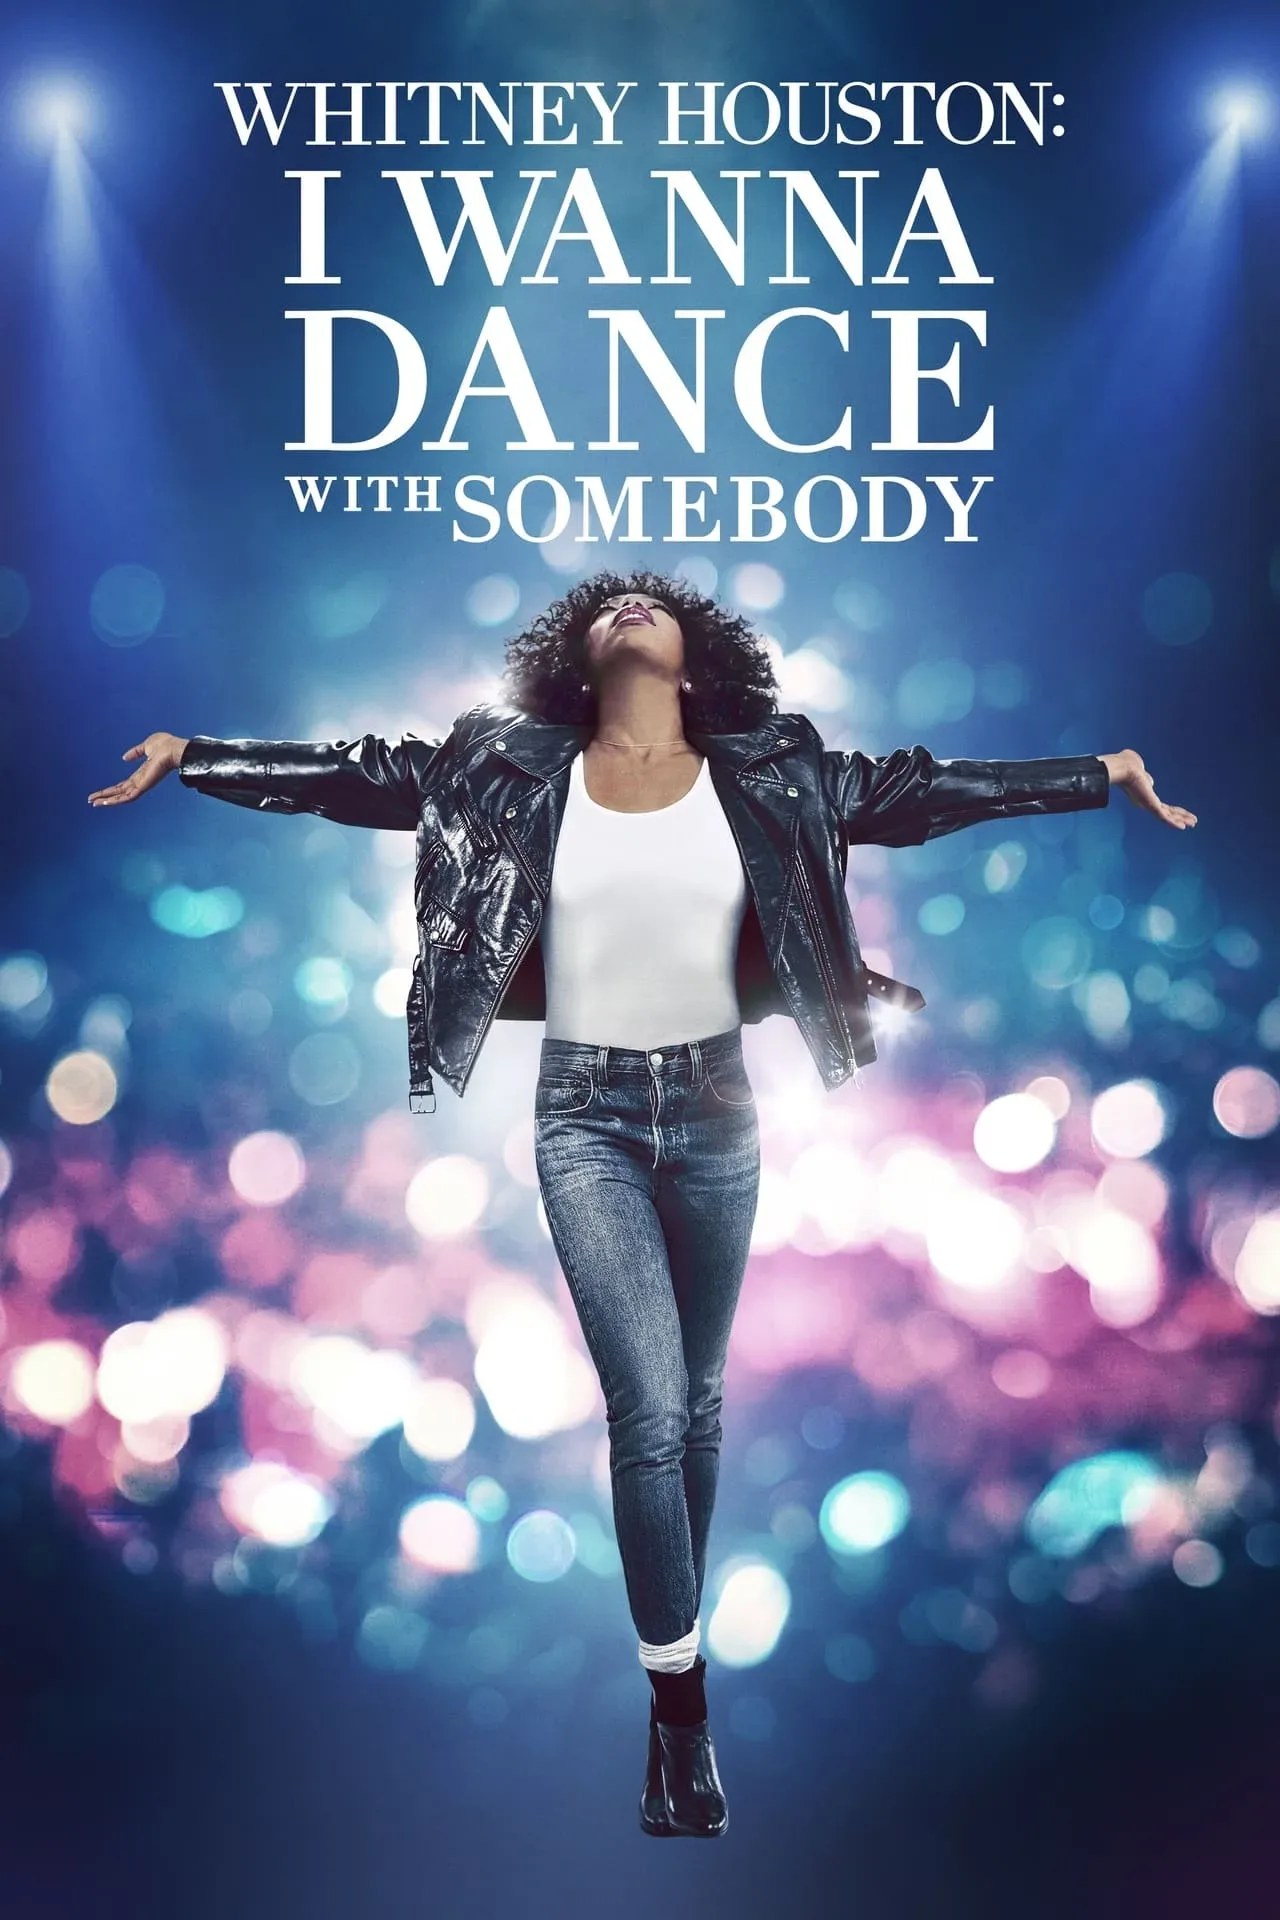 In the movie, Whitney Houston: I Wanna Dance with Somebody - The joyous, emotional, heartbreaking celebration of the life and music of Whitney Houston, the greatest female R&B pop vocalist of all time. Tracking her journey from obscurity to musical superstardom.